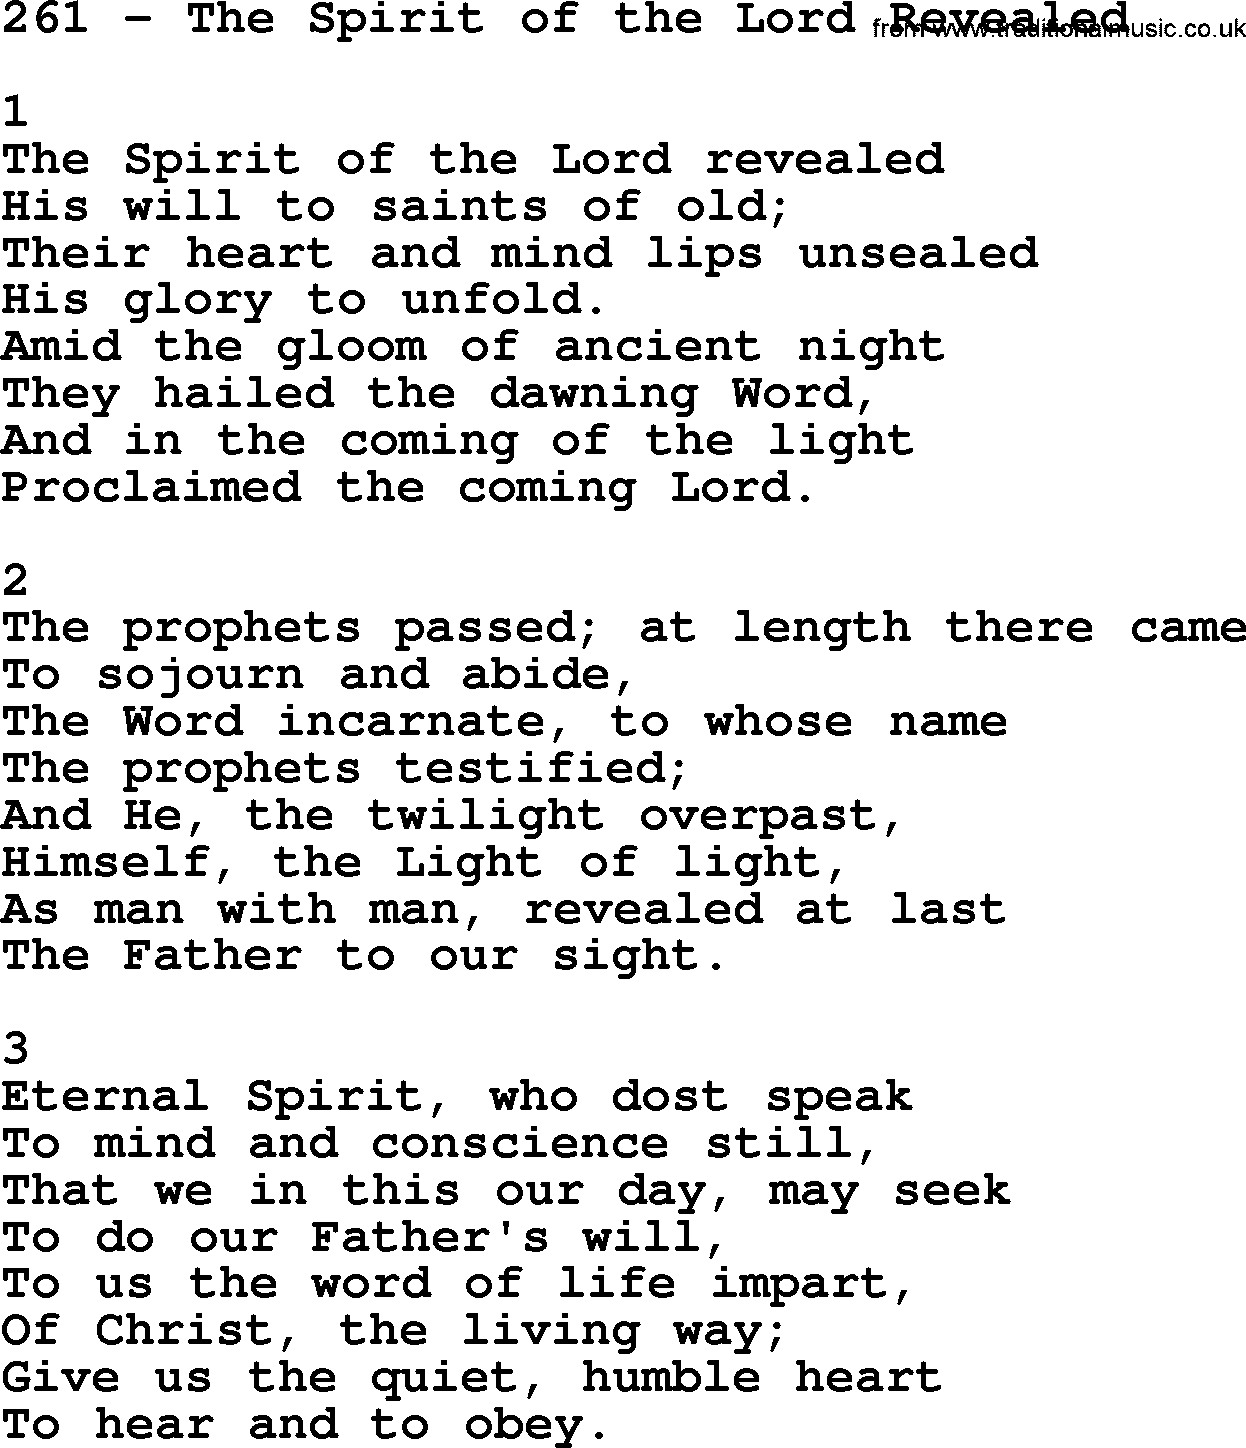 Complete Adventis Hymnal, title: 261-The Spirit Of The Lord Revealed, with lyrics, midi, mp3, powerpoints(PPT) and PDF,